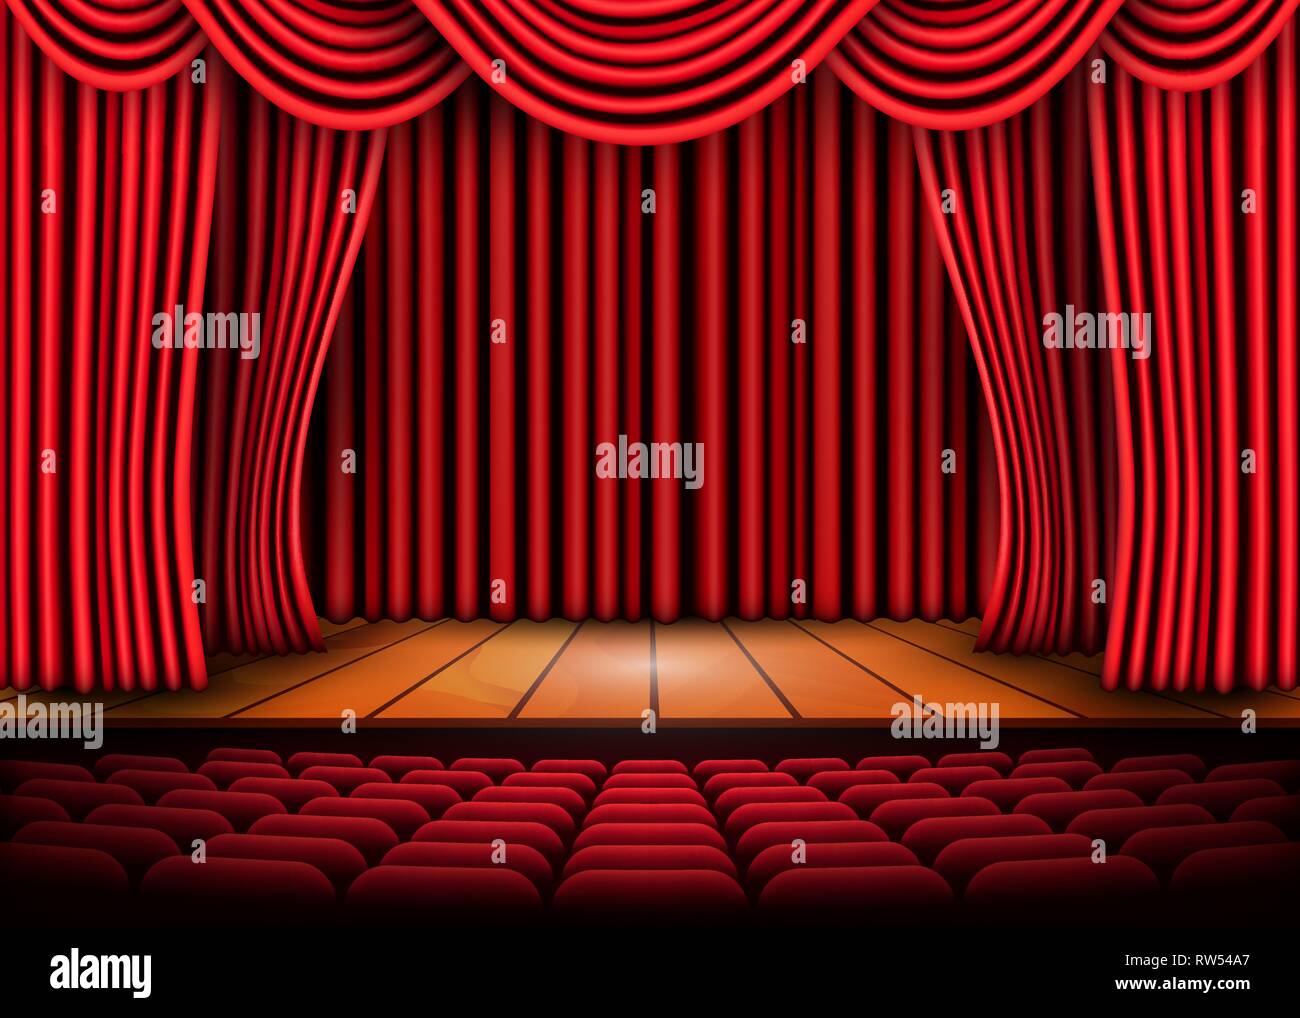 Theatrical scene with red curtains and wooden floor. Stock vector ...